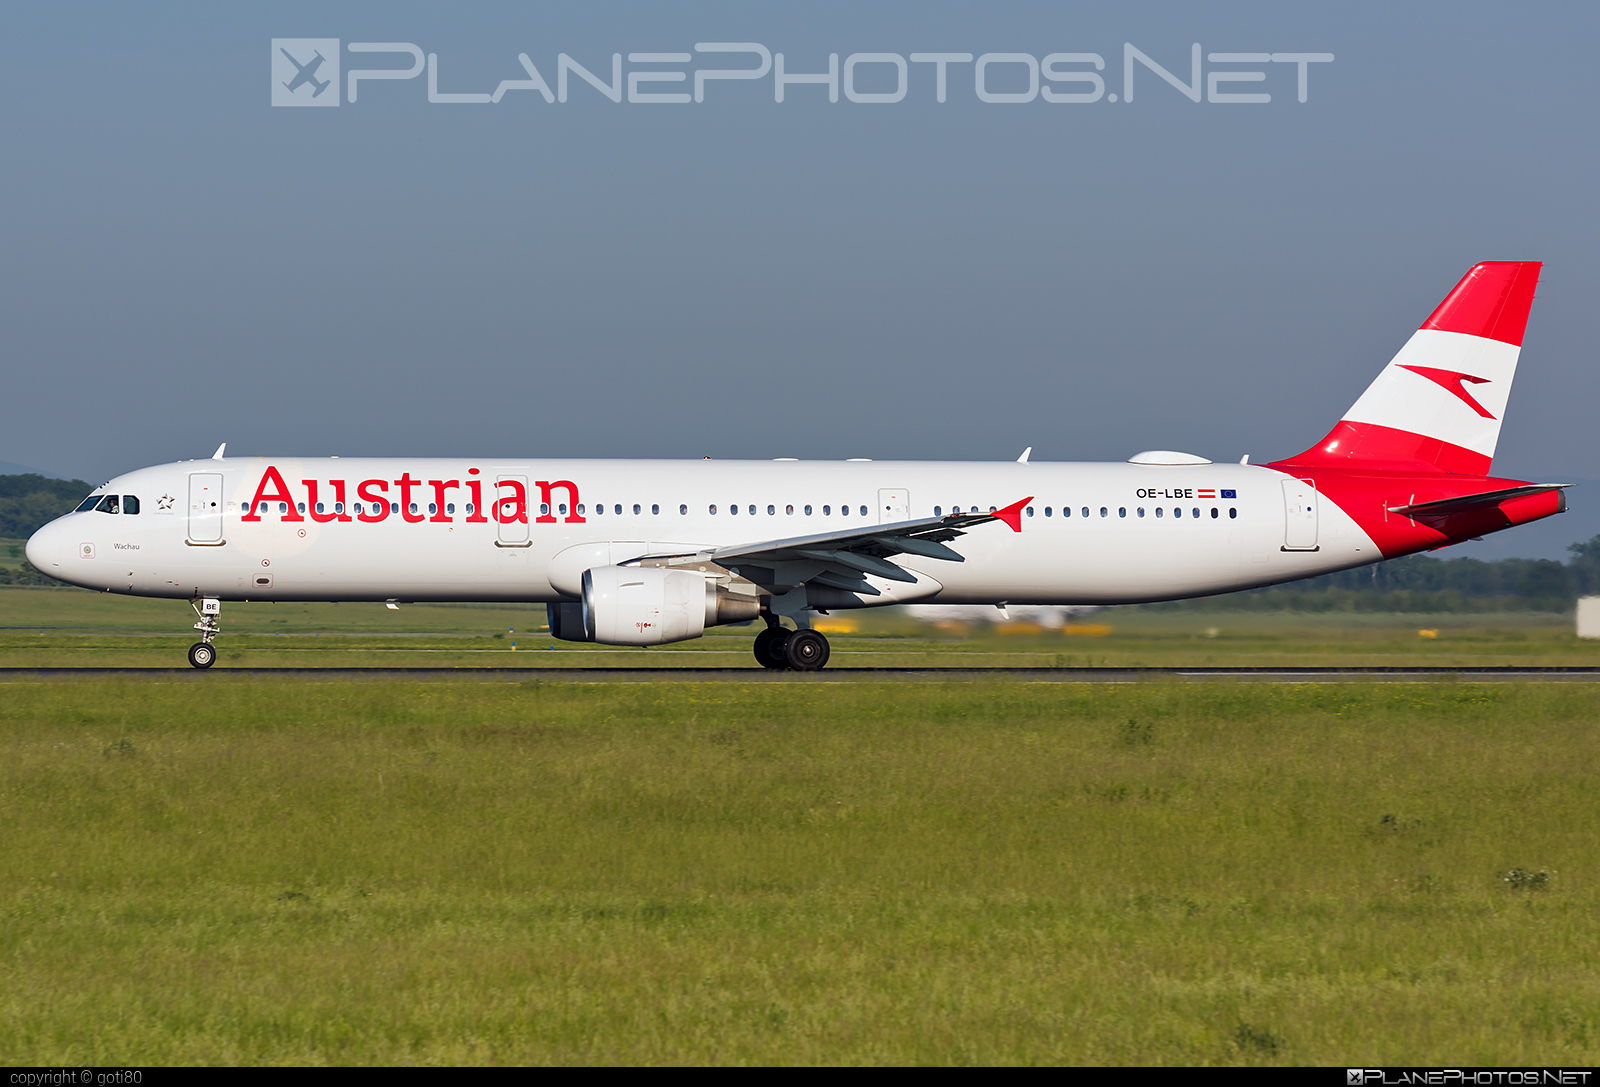 Airbus A321-211 - OE-LBE operated by Austrian Airlines #a320family #a321 #airbus #airbus321 #austrian #austrianAirlines